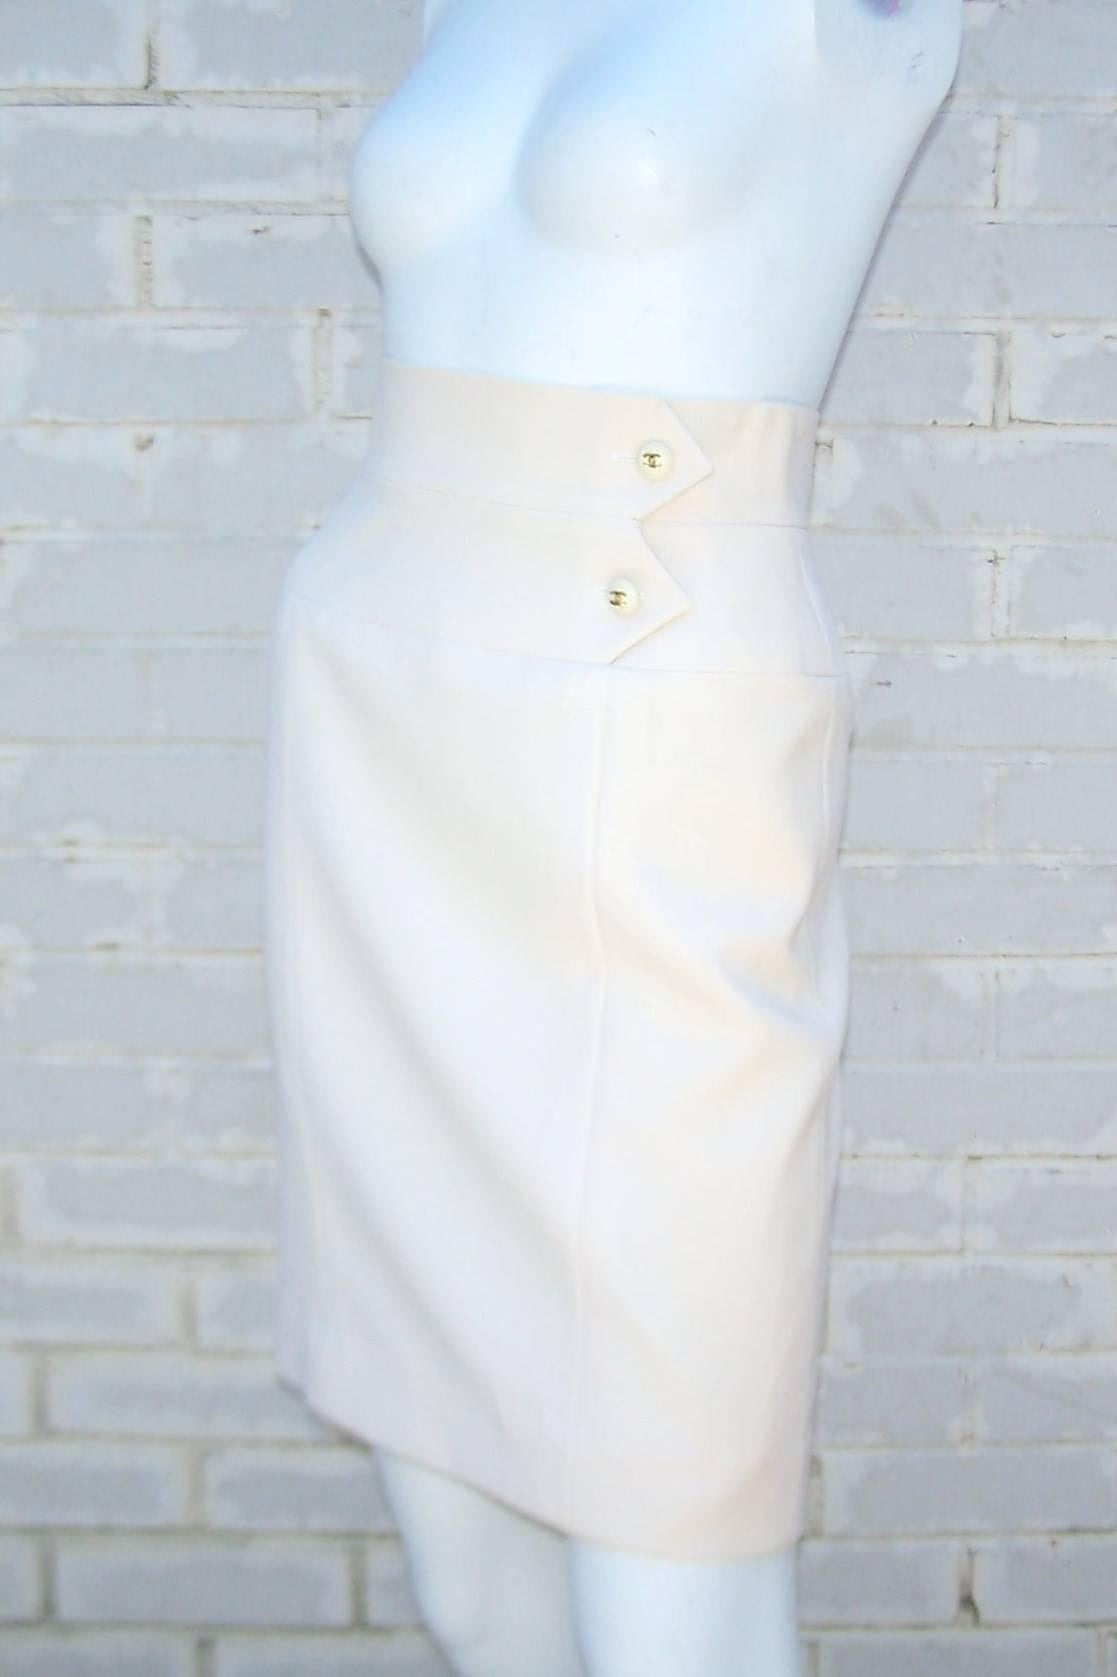 This classic Chanel winter white skirt knows no seasons and can be worn to achieve many looks all year long.  The skirt zips and hooks at the back with inside hooking waistband.  There are two arrow details at the waistline with 'CC' logo buttons